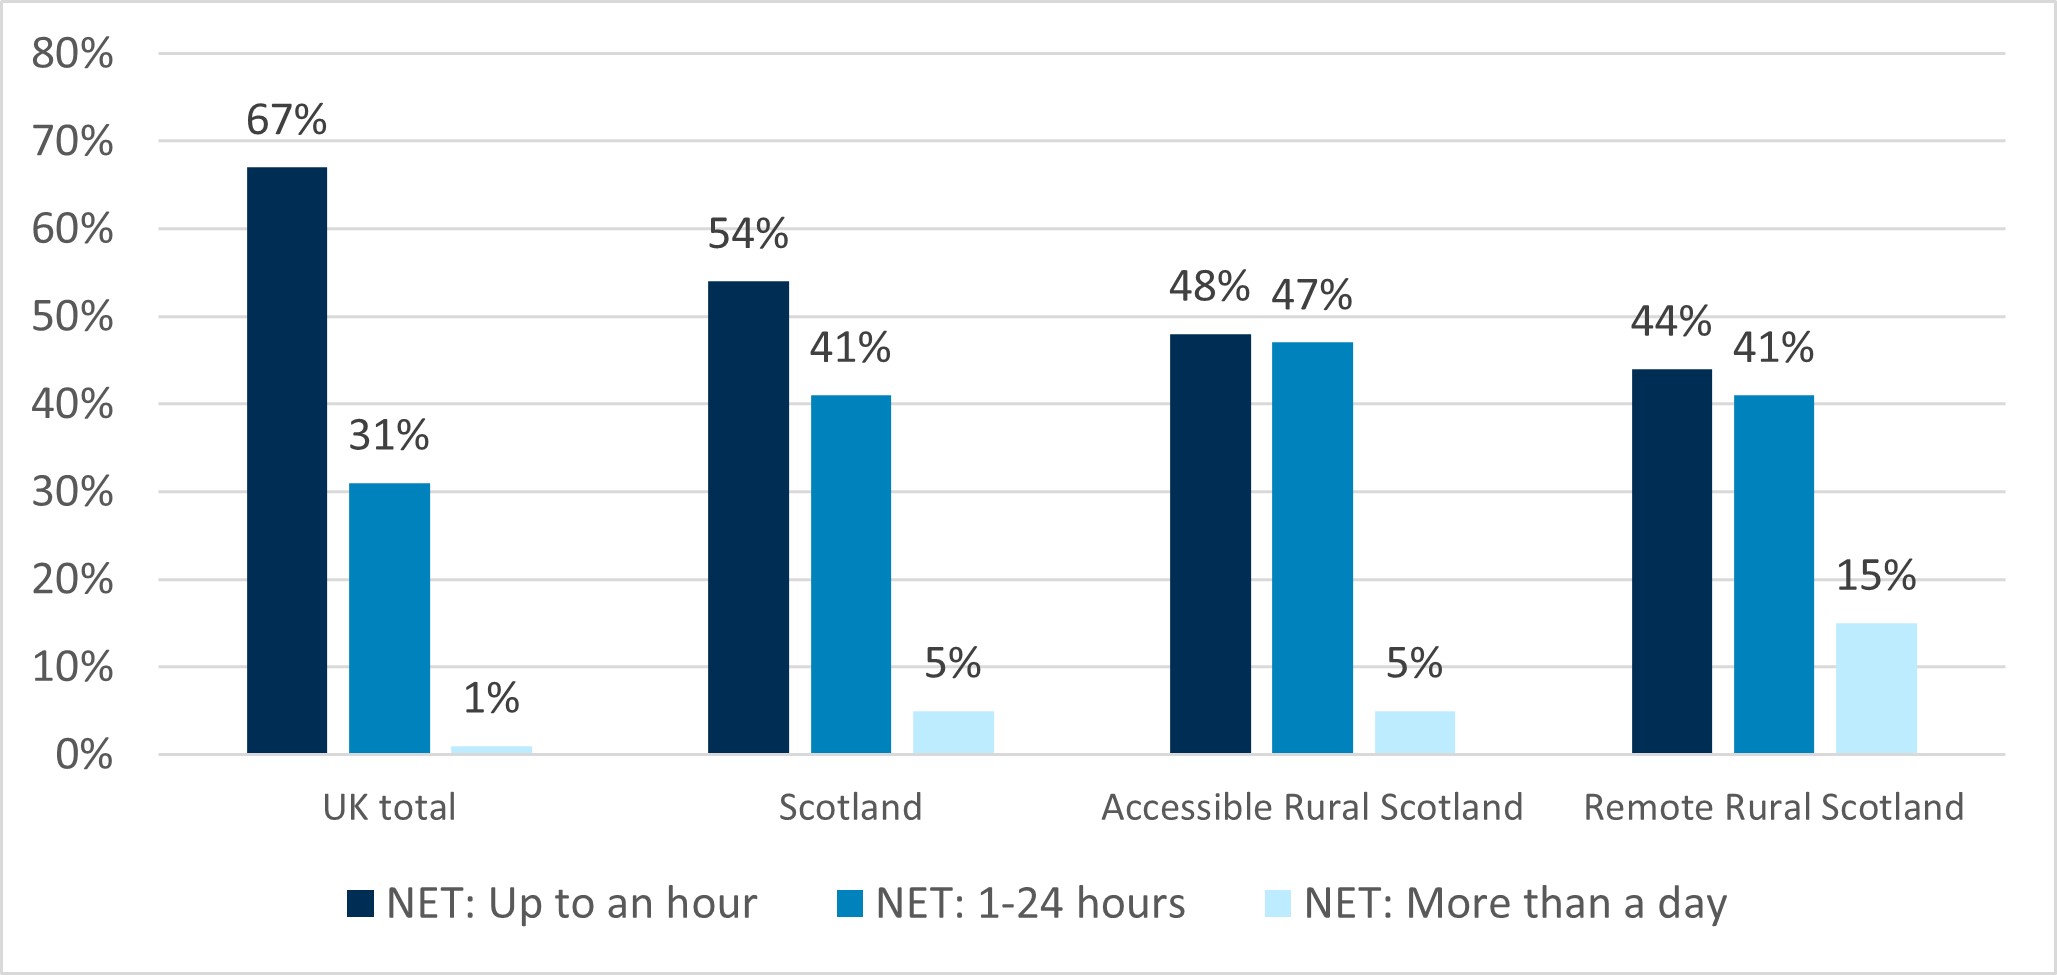 A chart showing responses for the UK, Scotland, accessible rural Scotland and remote rural Scotland to the question 'on average, how long do any power cuts you experience last for?'. Responses are split into the categories of NET: up to an hour, NET: 1-24 hours and NET: more than a day.